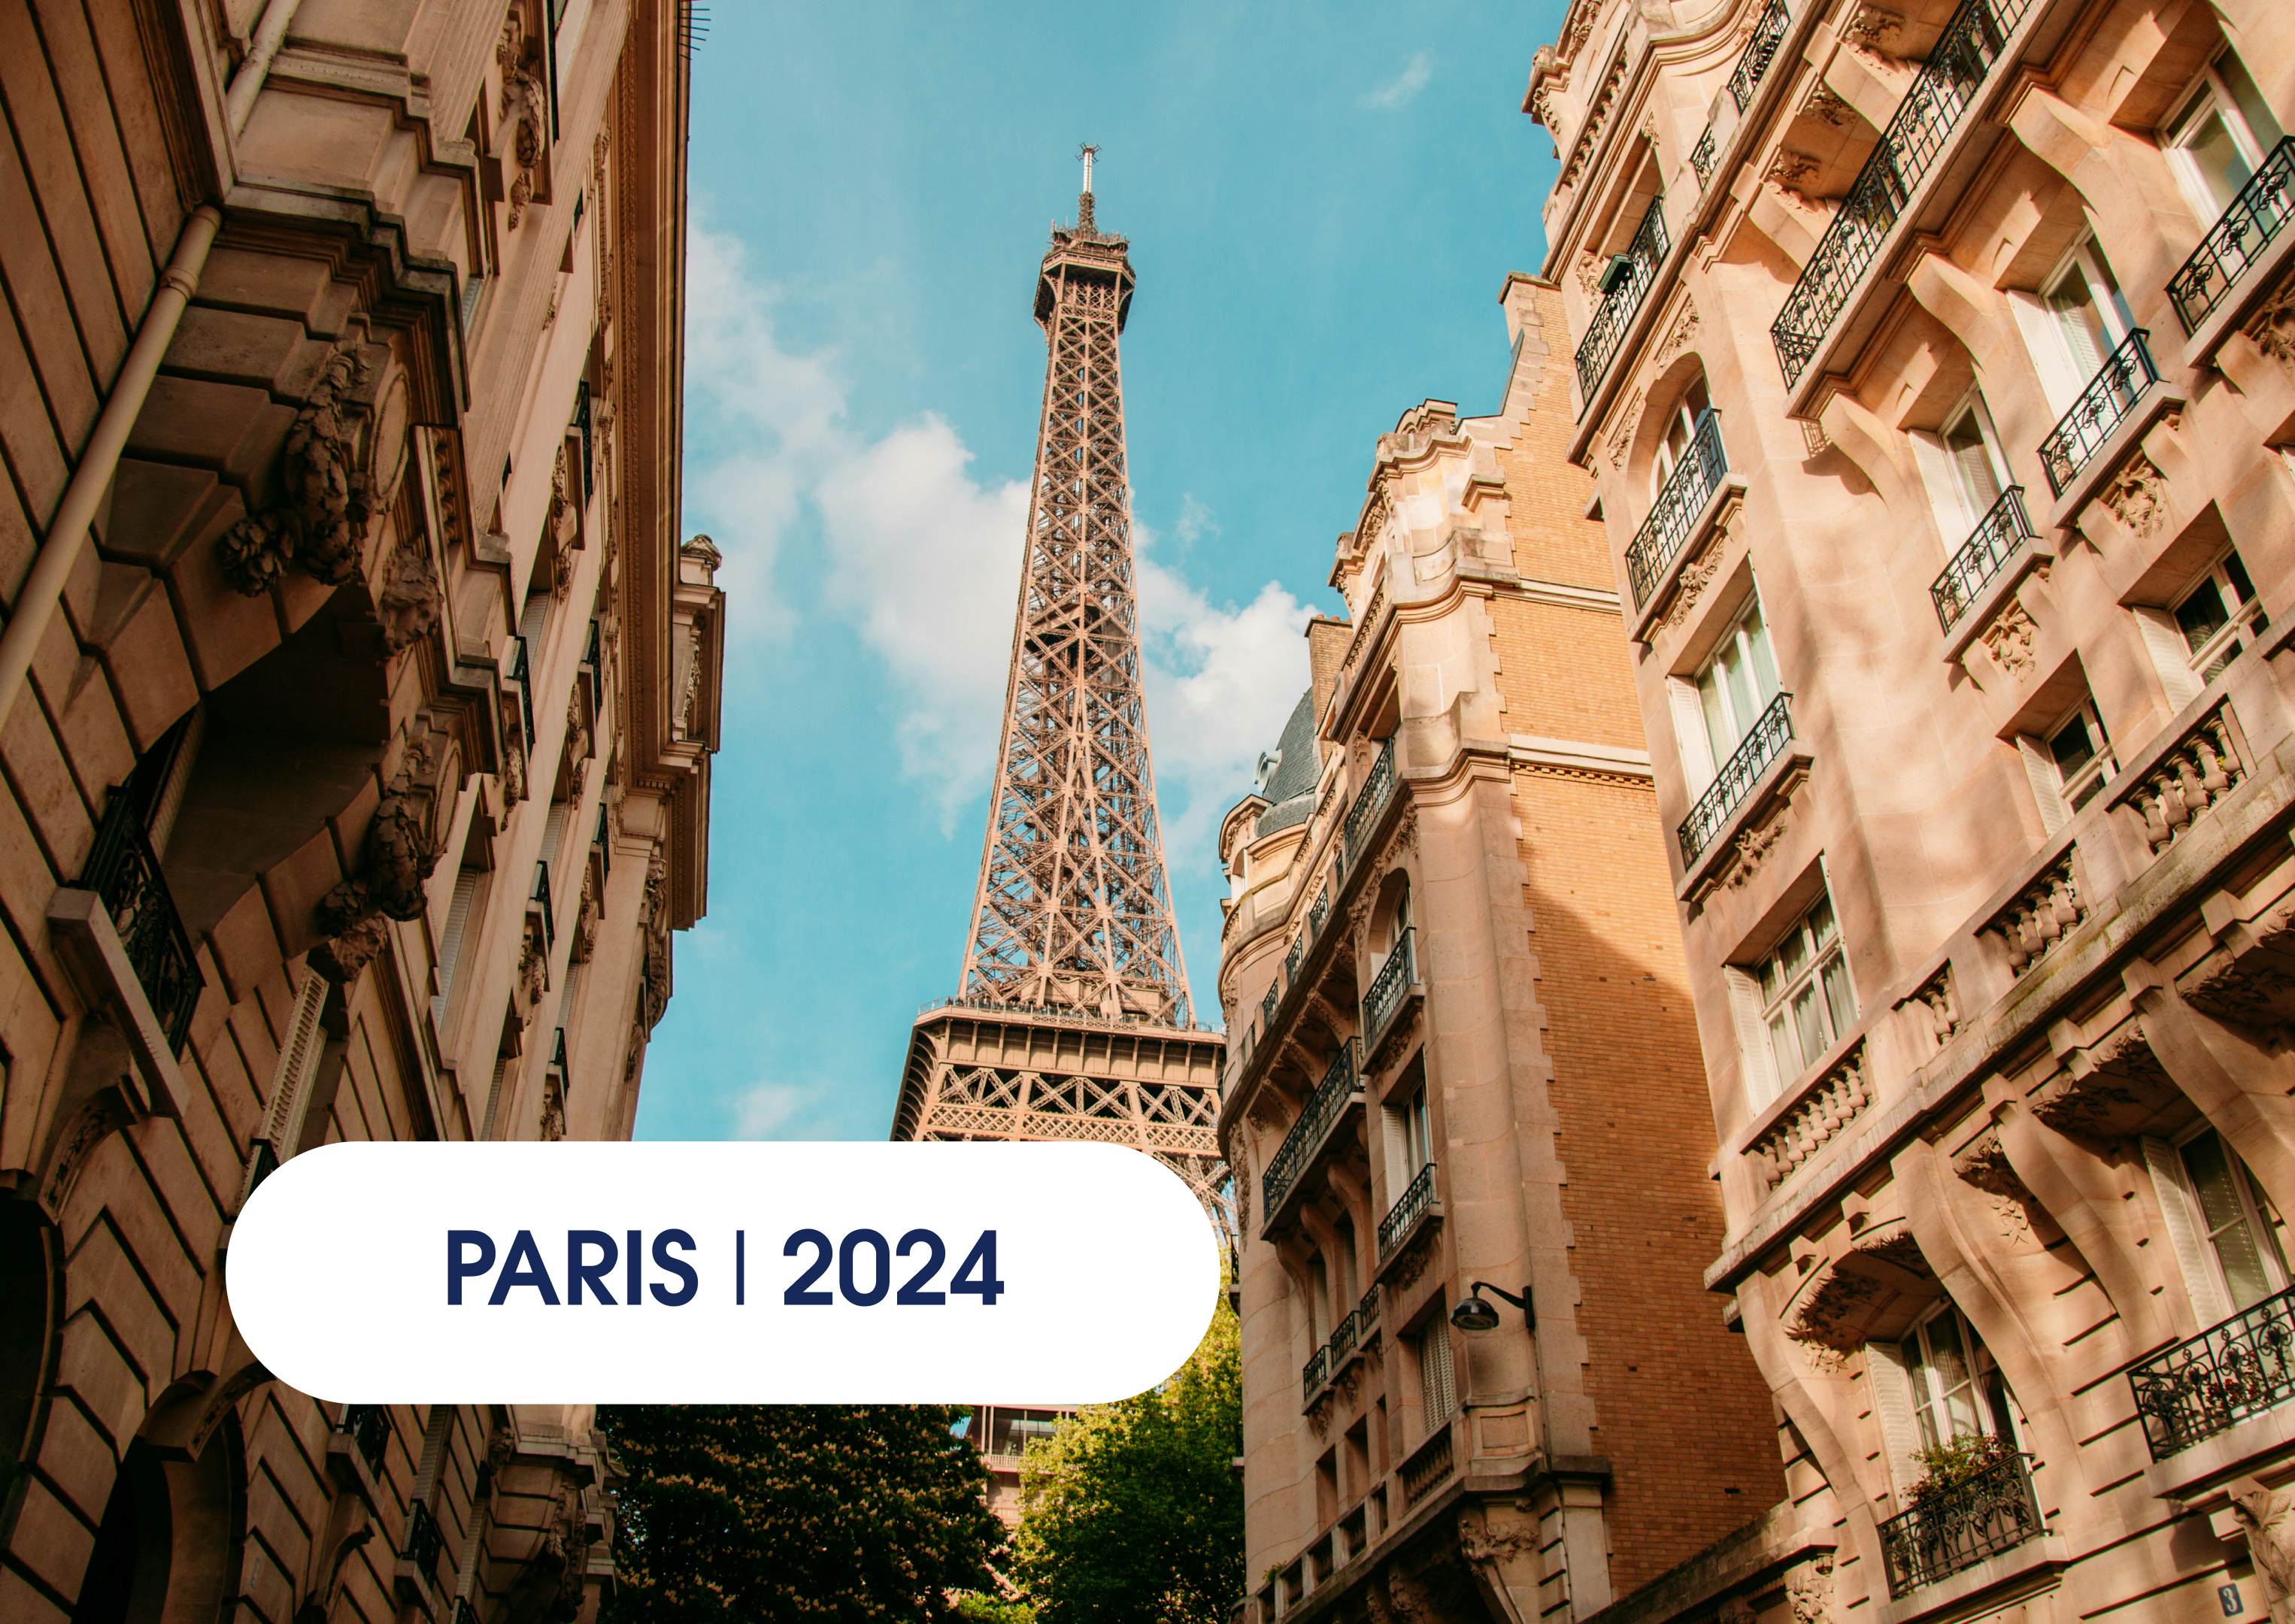 How to Manage Your Corporate Housing Needs During the 2024 Olympic & Paralympic Games in Paris